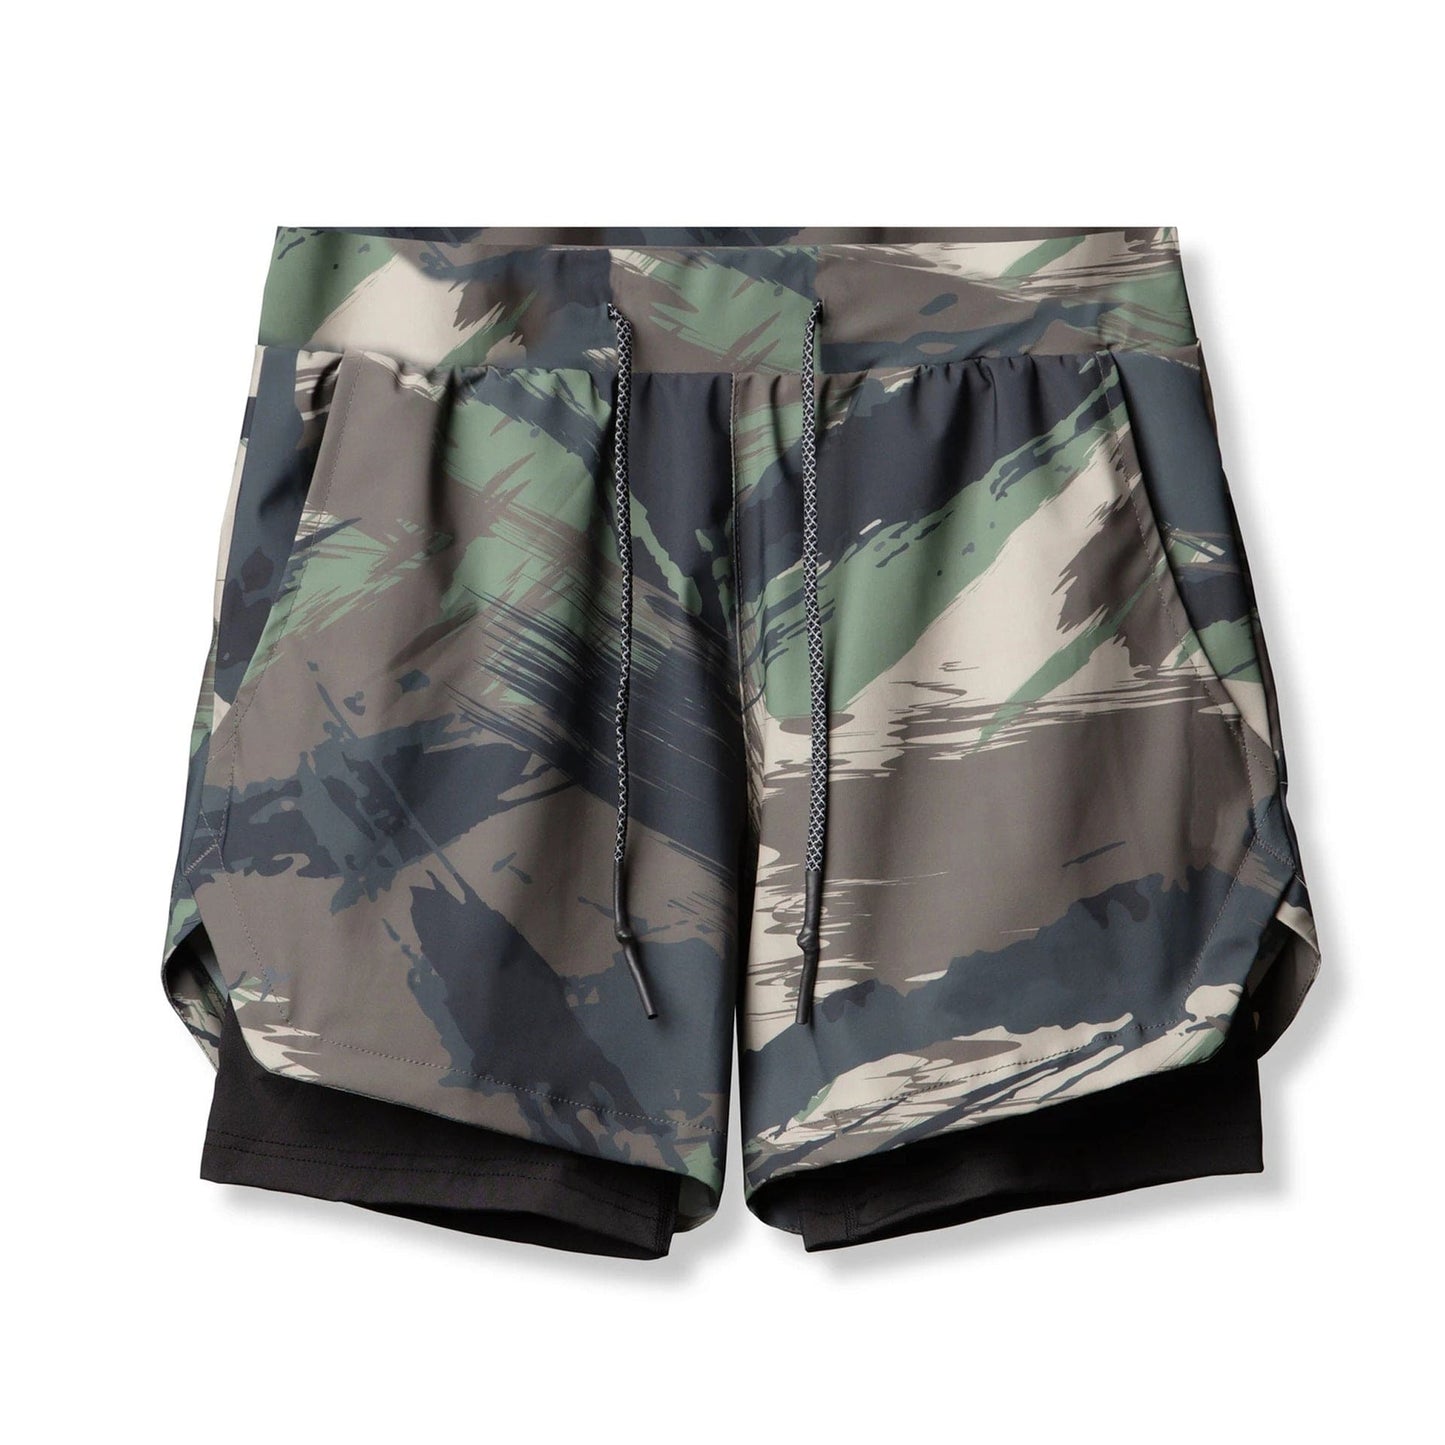 Allrj lined strong short Camouflage Green